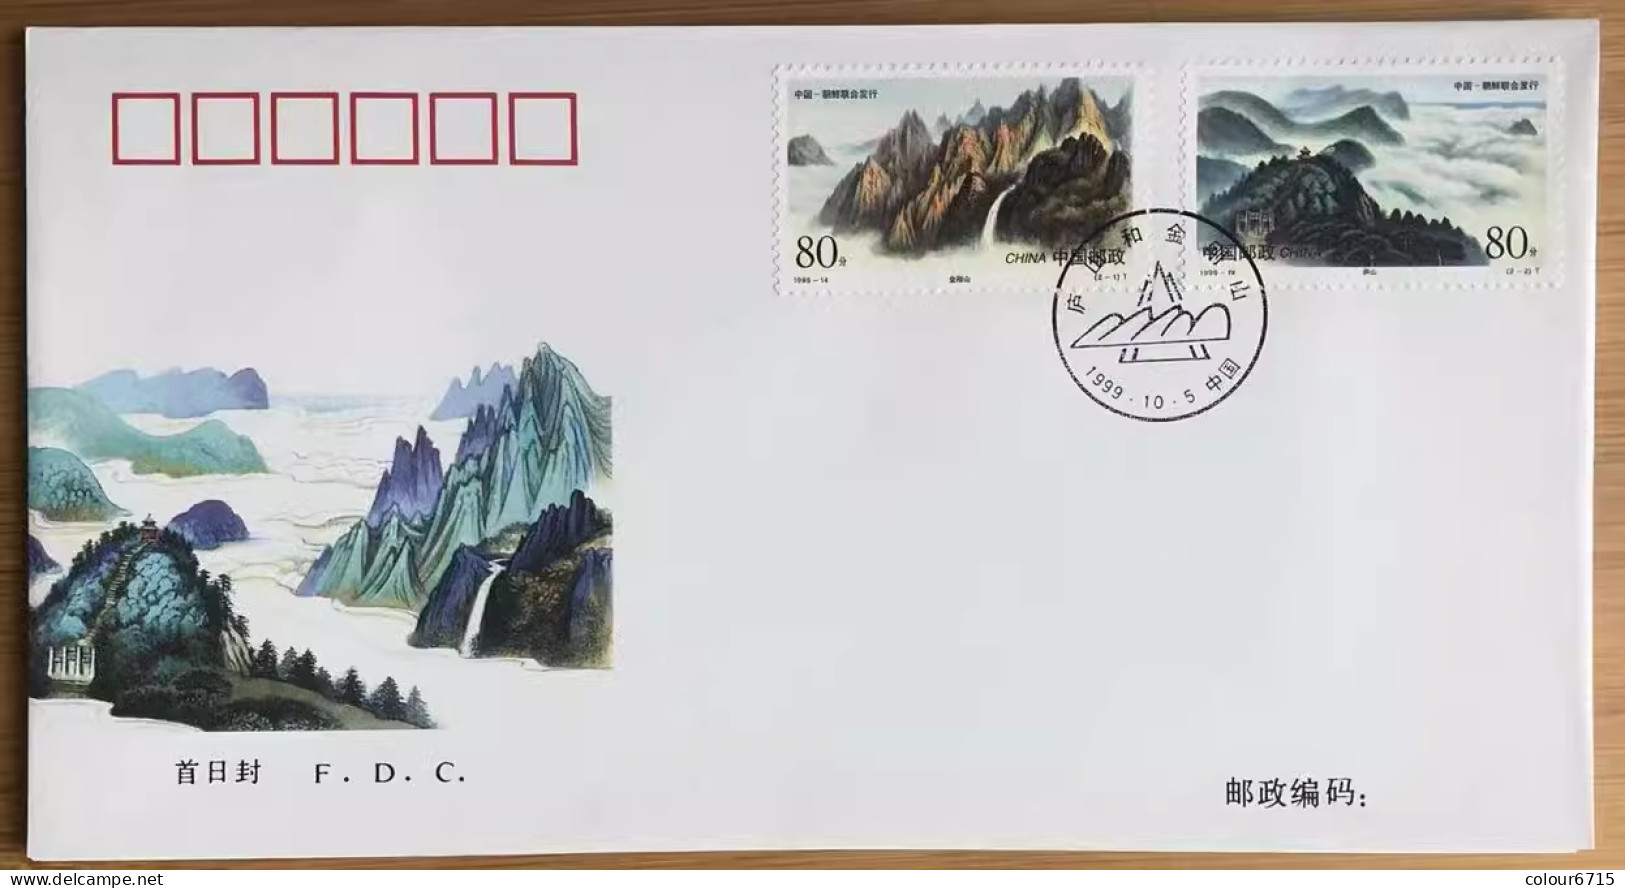 China FDC/1999-14 Mountains — Joint Issue Stamps With North Korea 1v MNH - 1990-1999